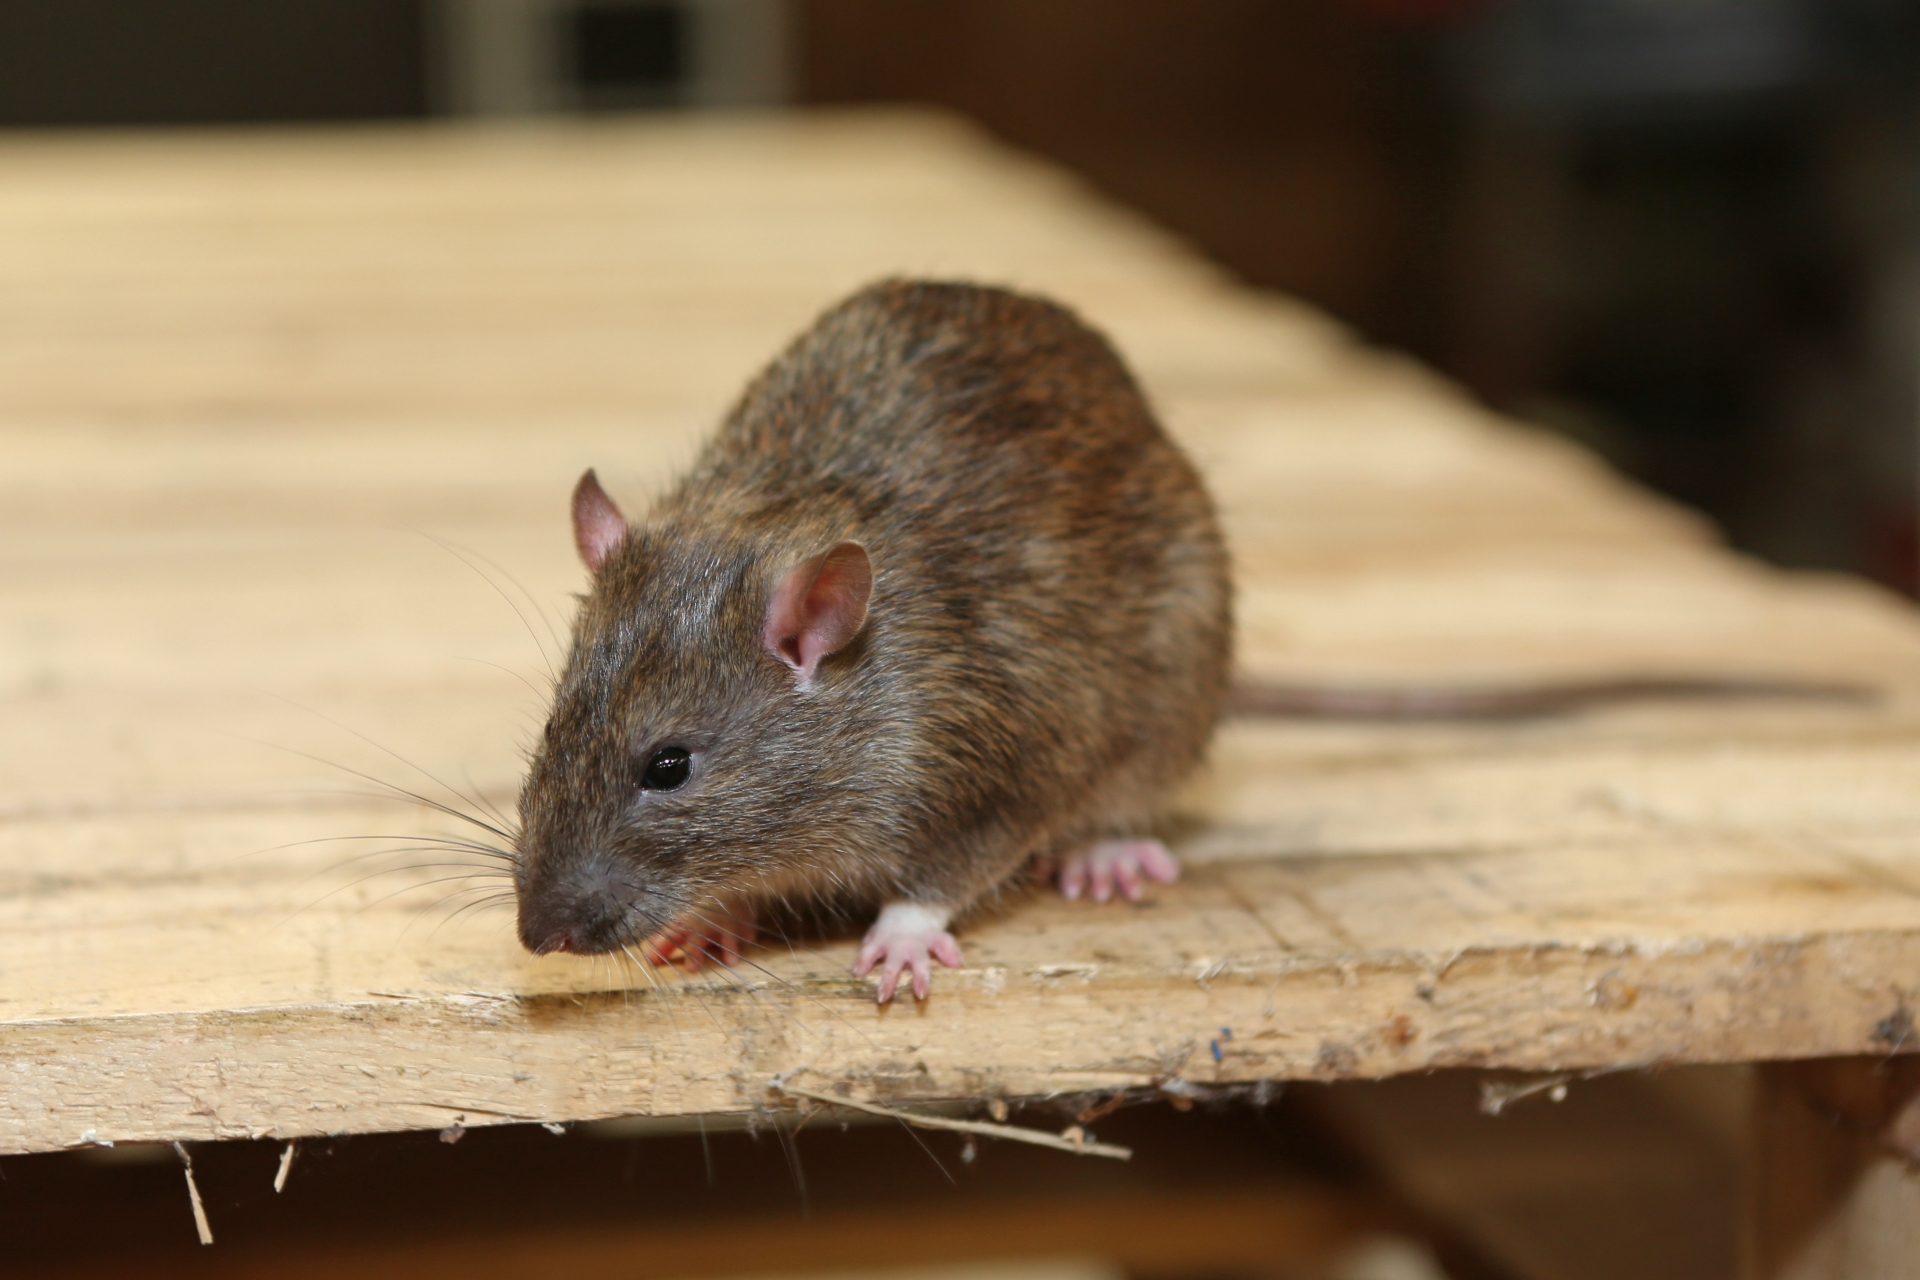 Rat extermination, Pest Control in Heston, Osterley, TW5. Call Now 020 8166 9746